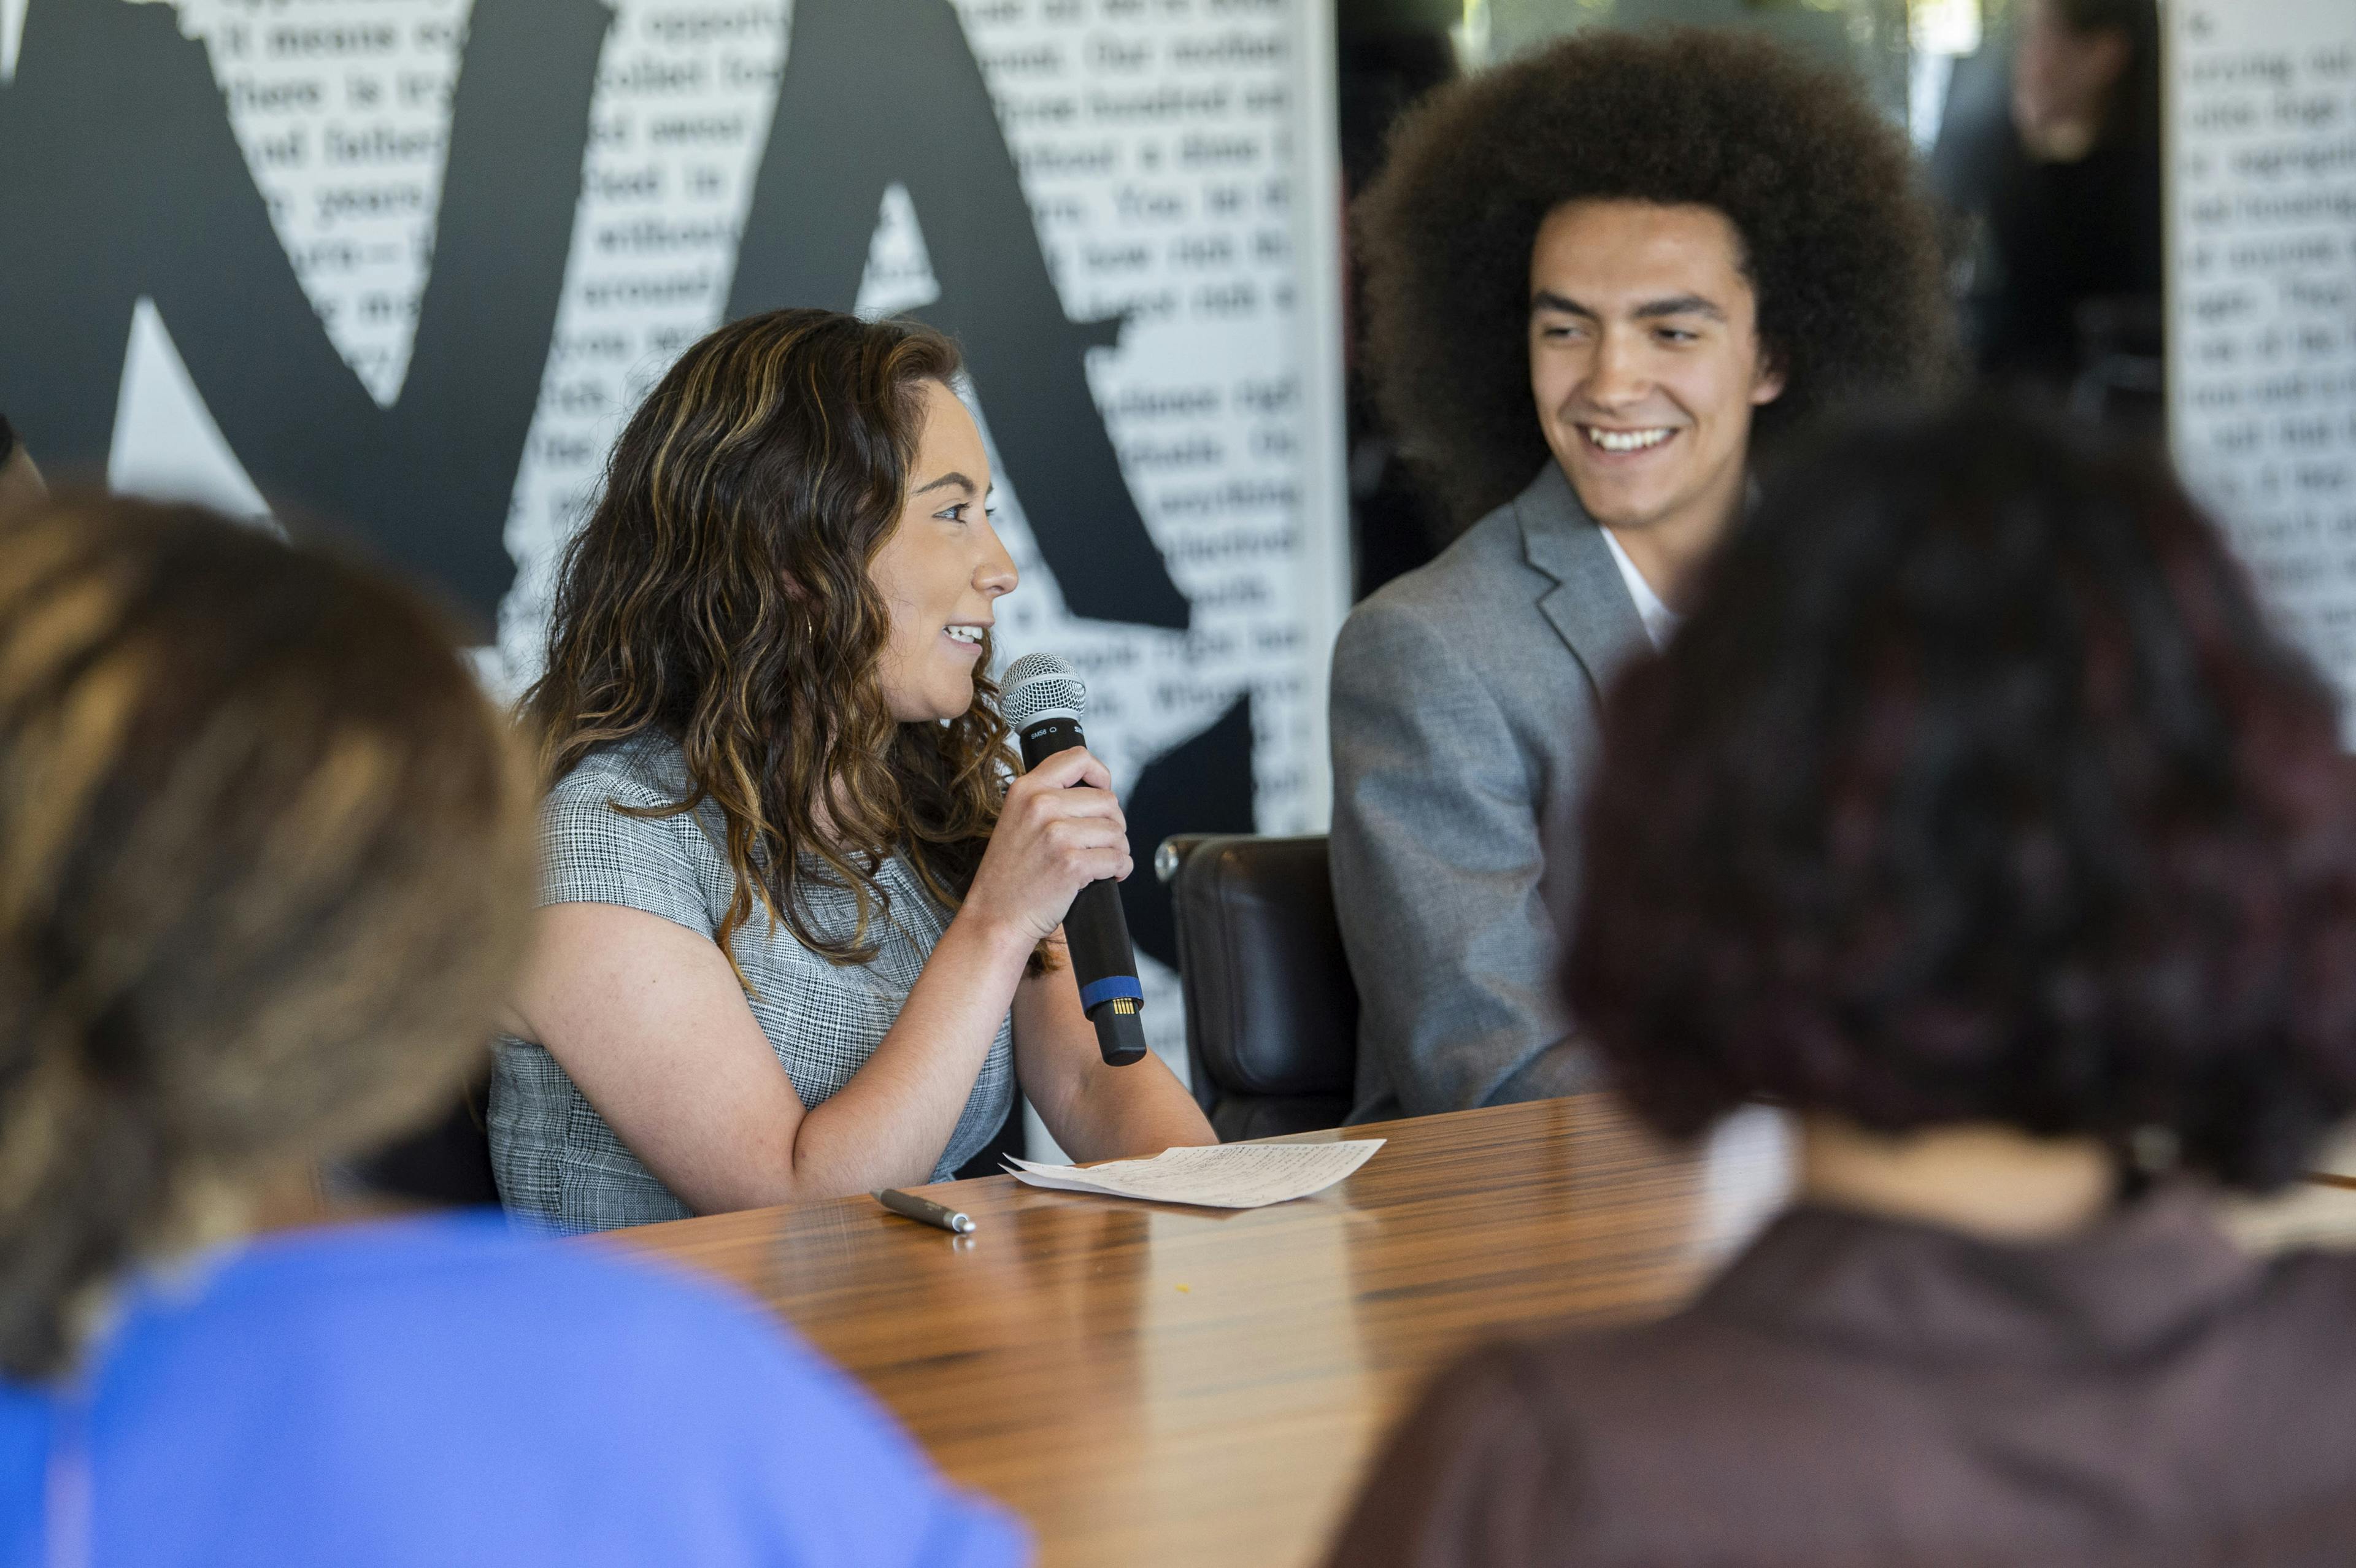 Two interns smiling and speaking at a table